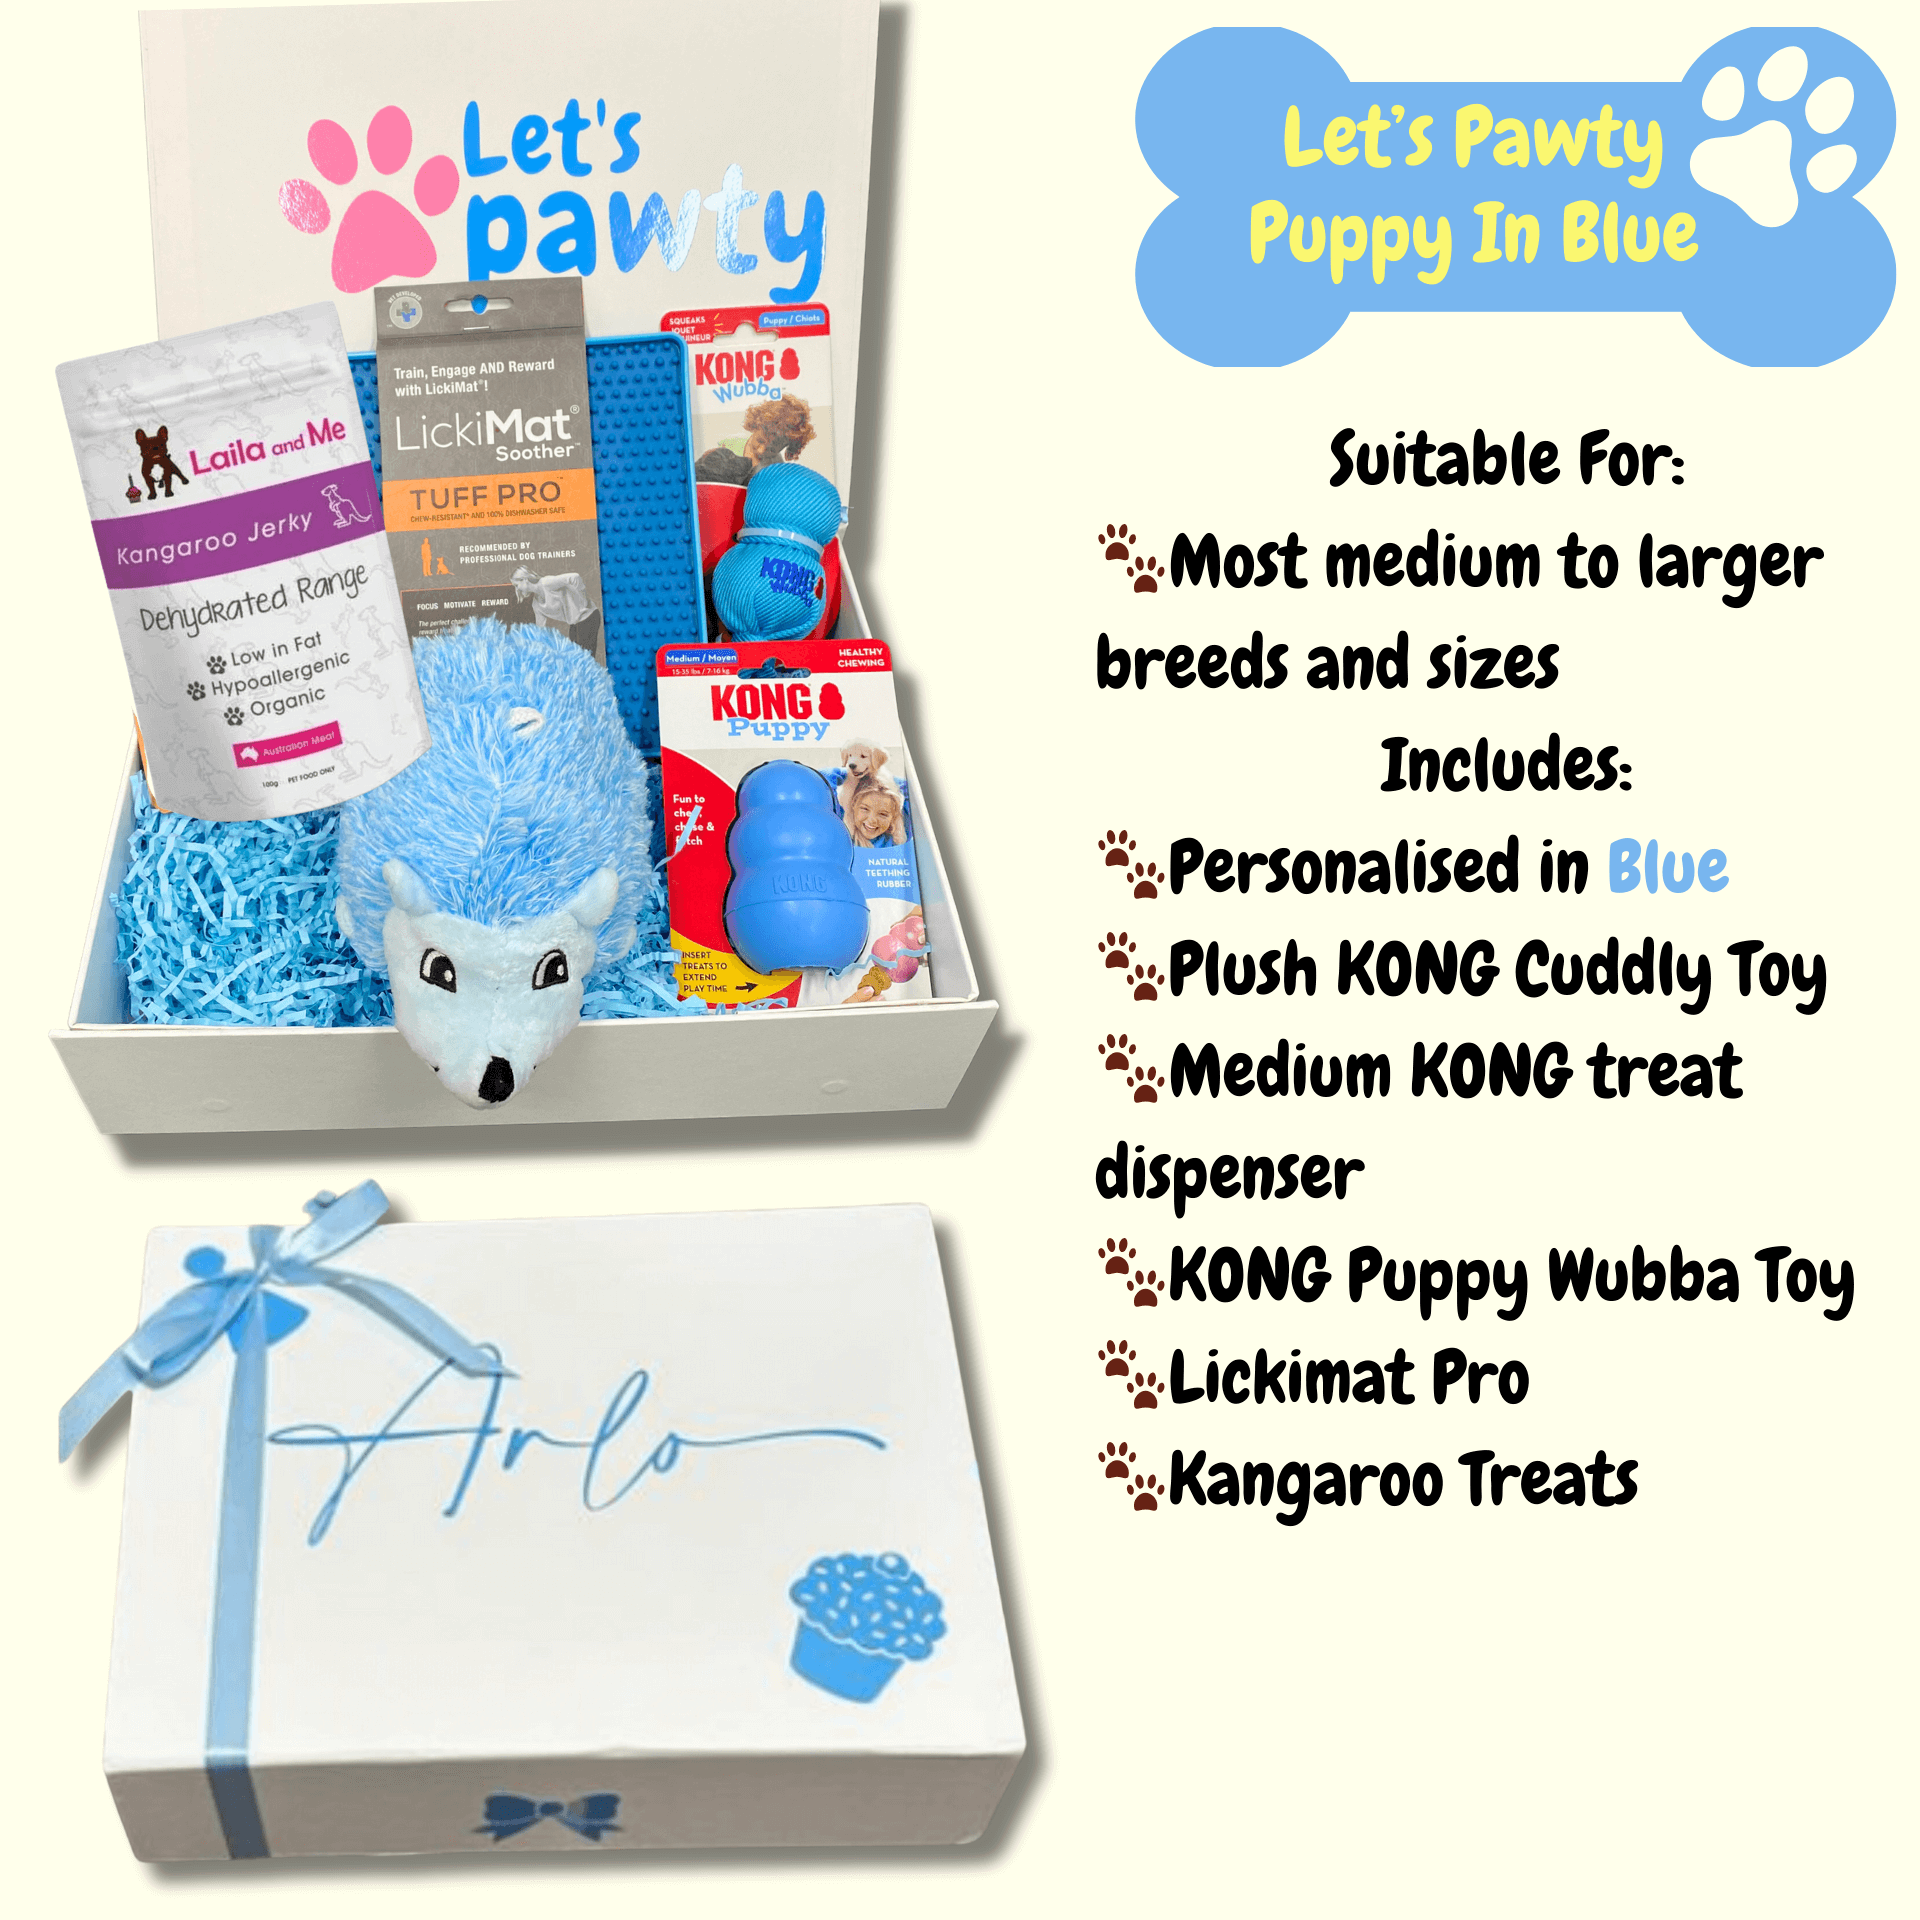 Puppy gift packs Let's Pawty Australia fur baby